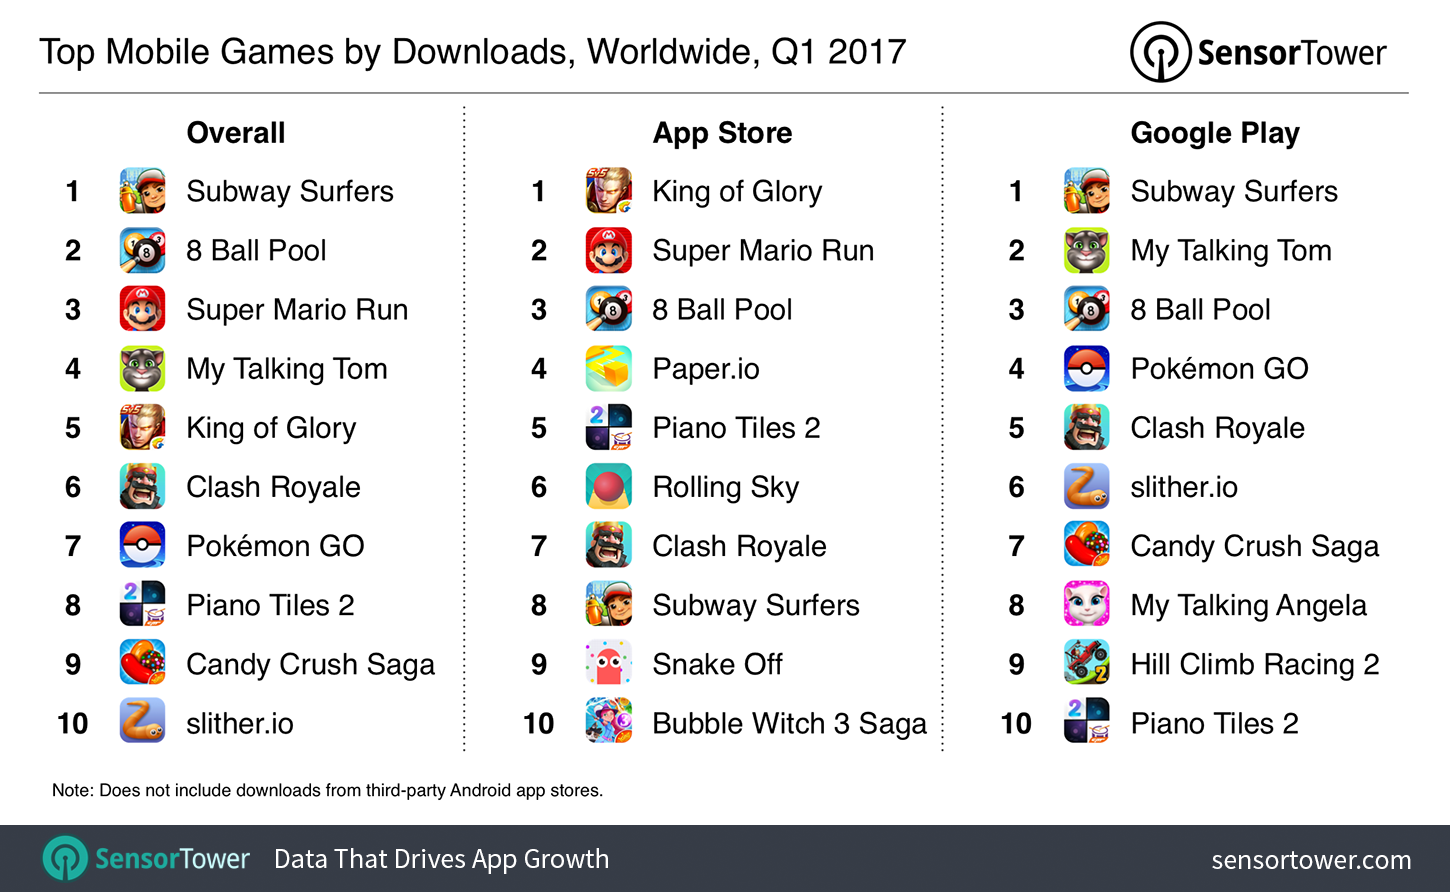 Q1 2017's Top Mobile Games by Downloads